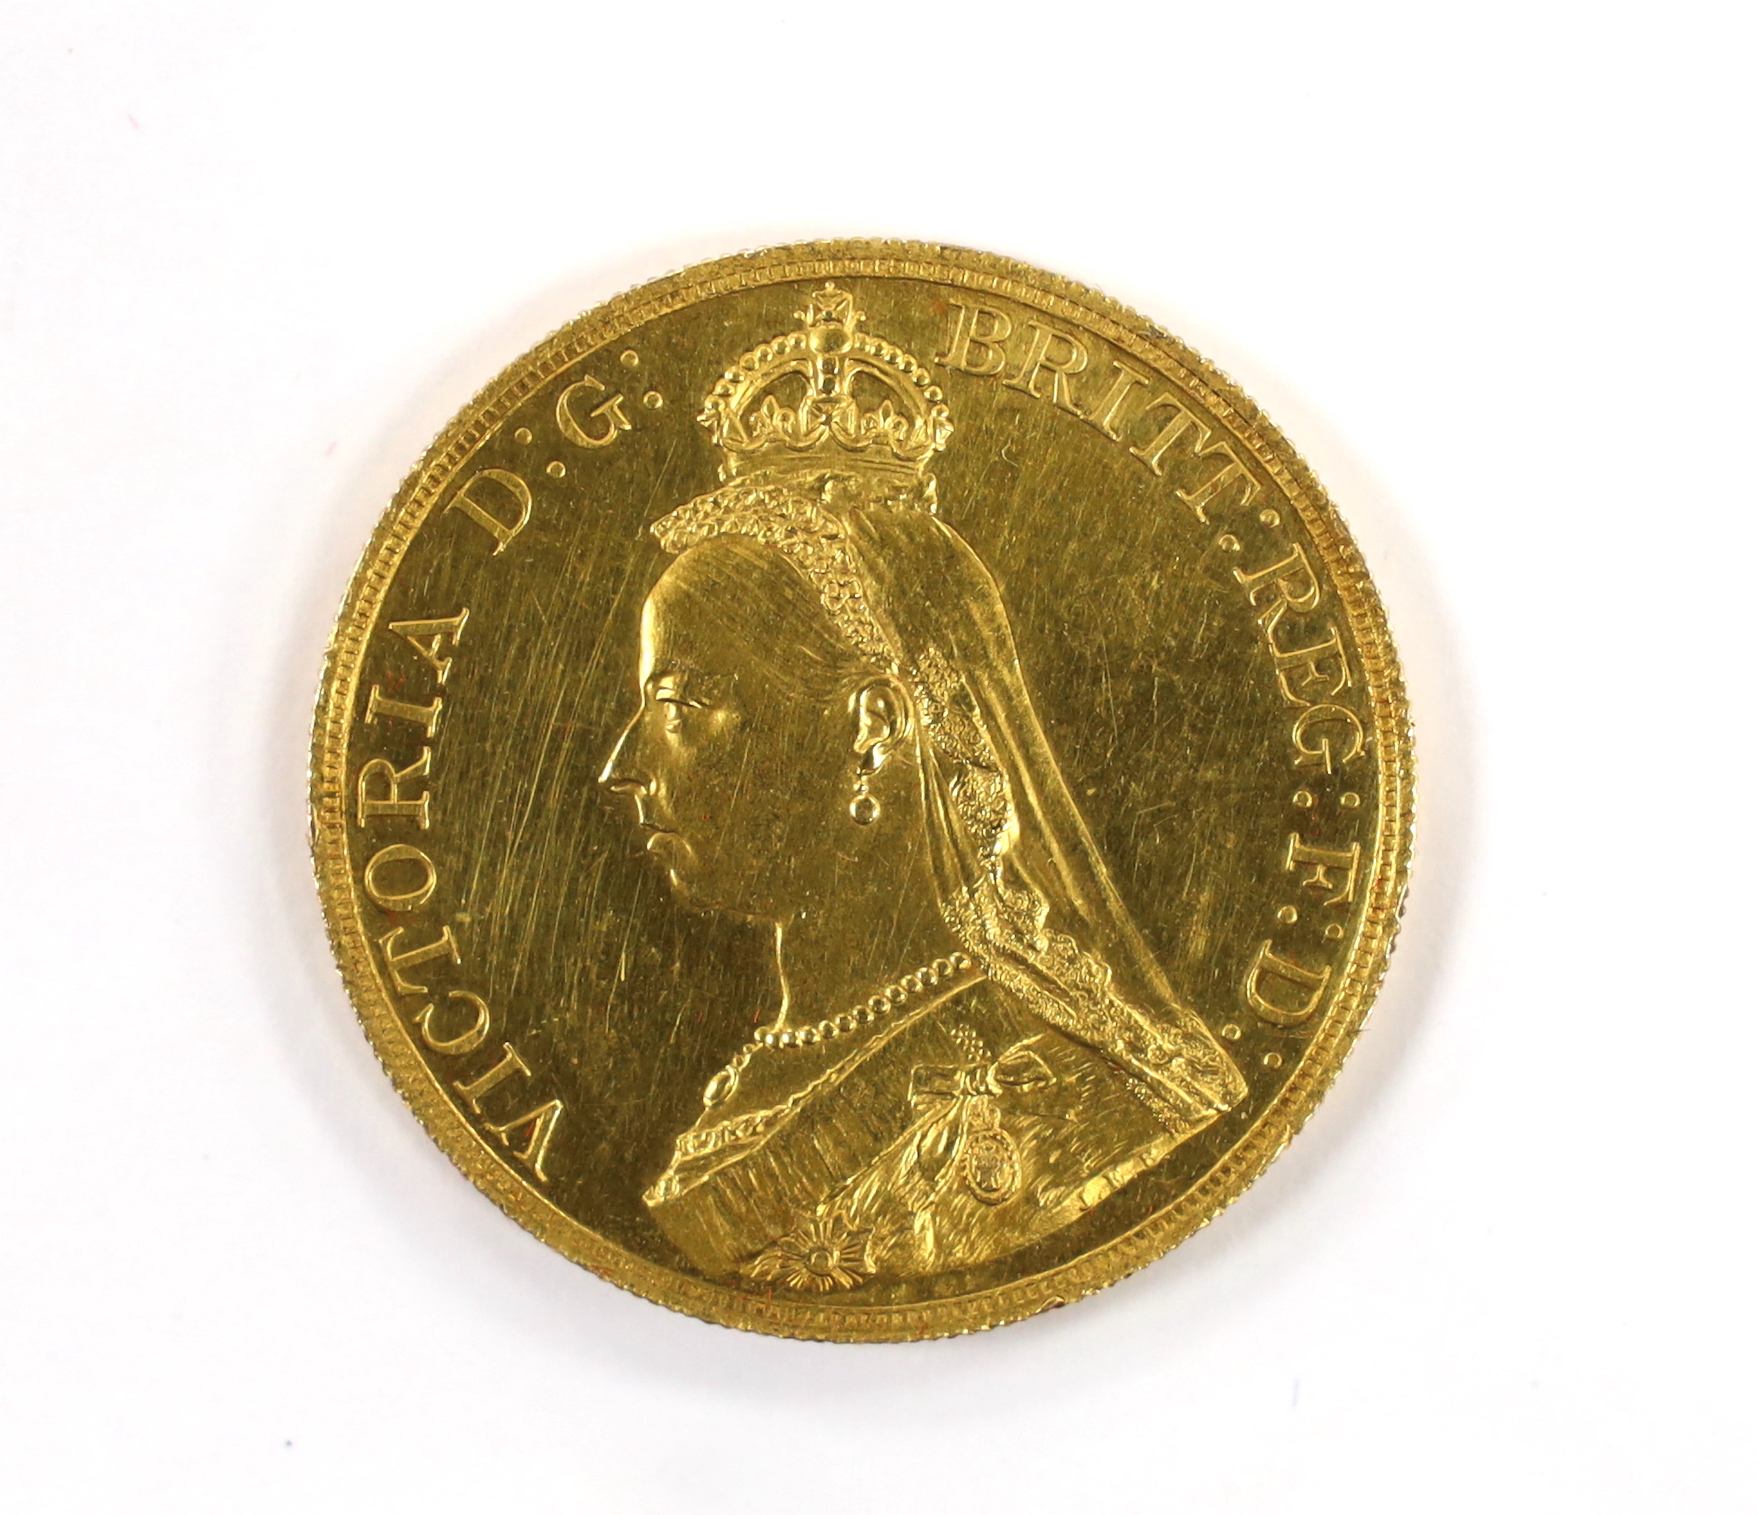 A British gold coins, Victoria gold £5, 1887, small edge nicks, otherwise about UNC.